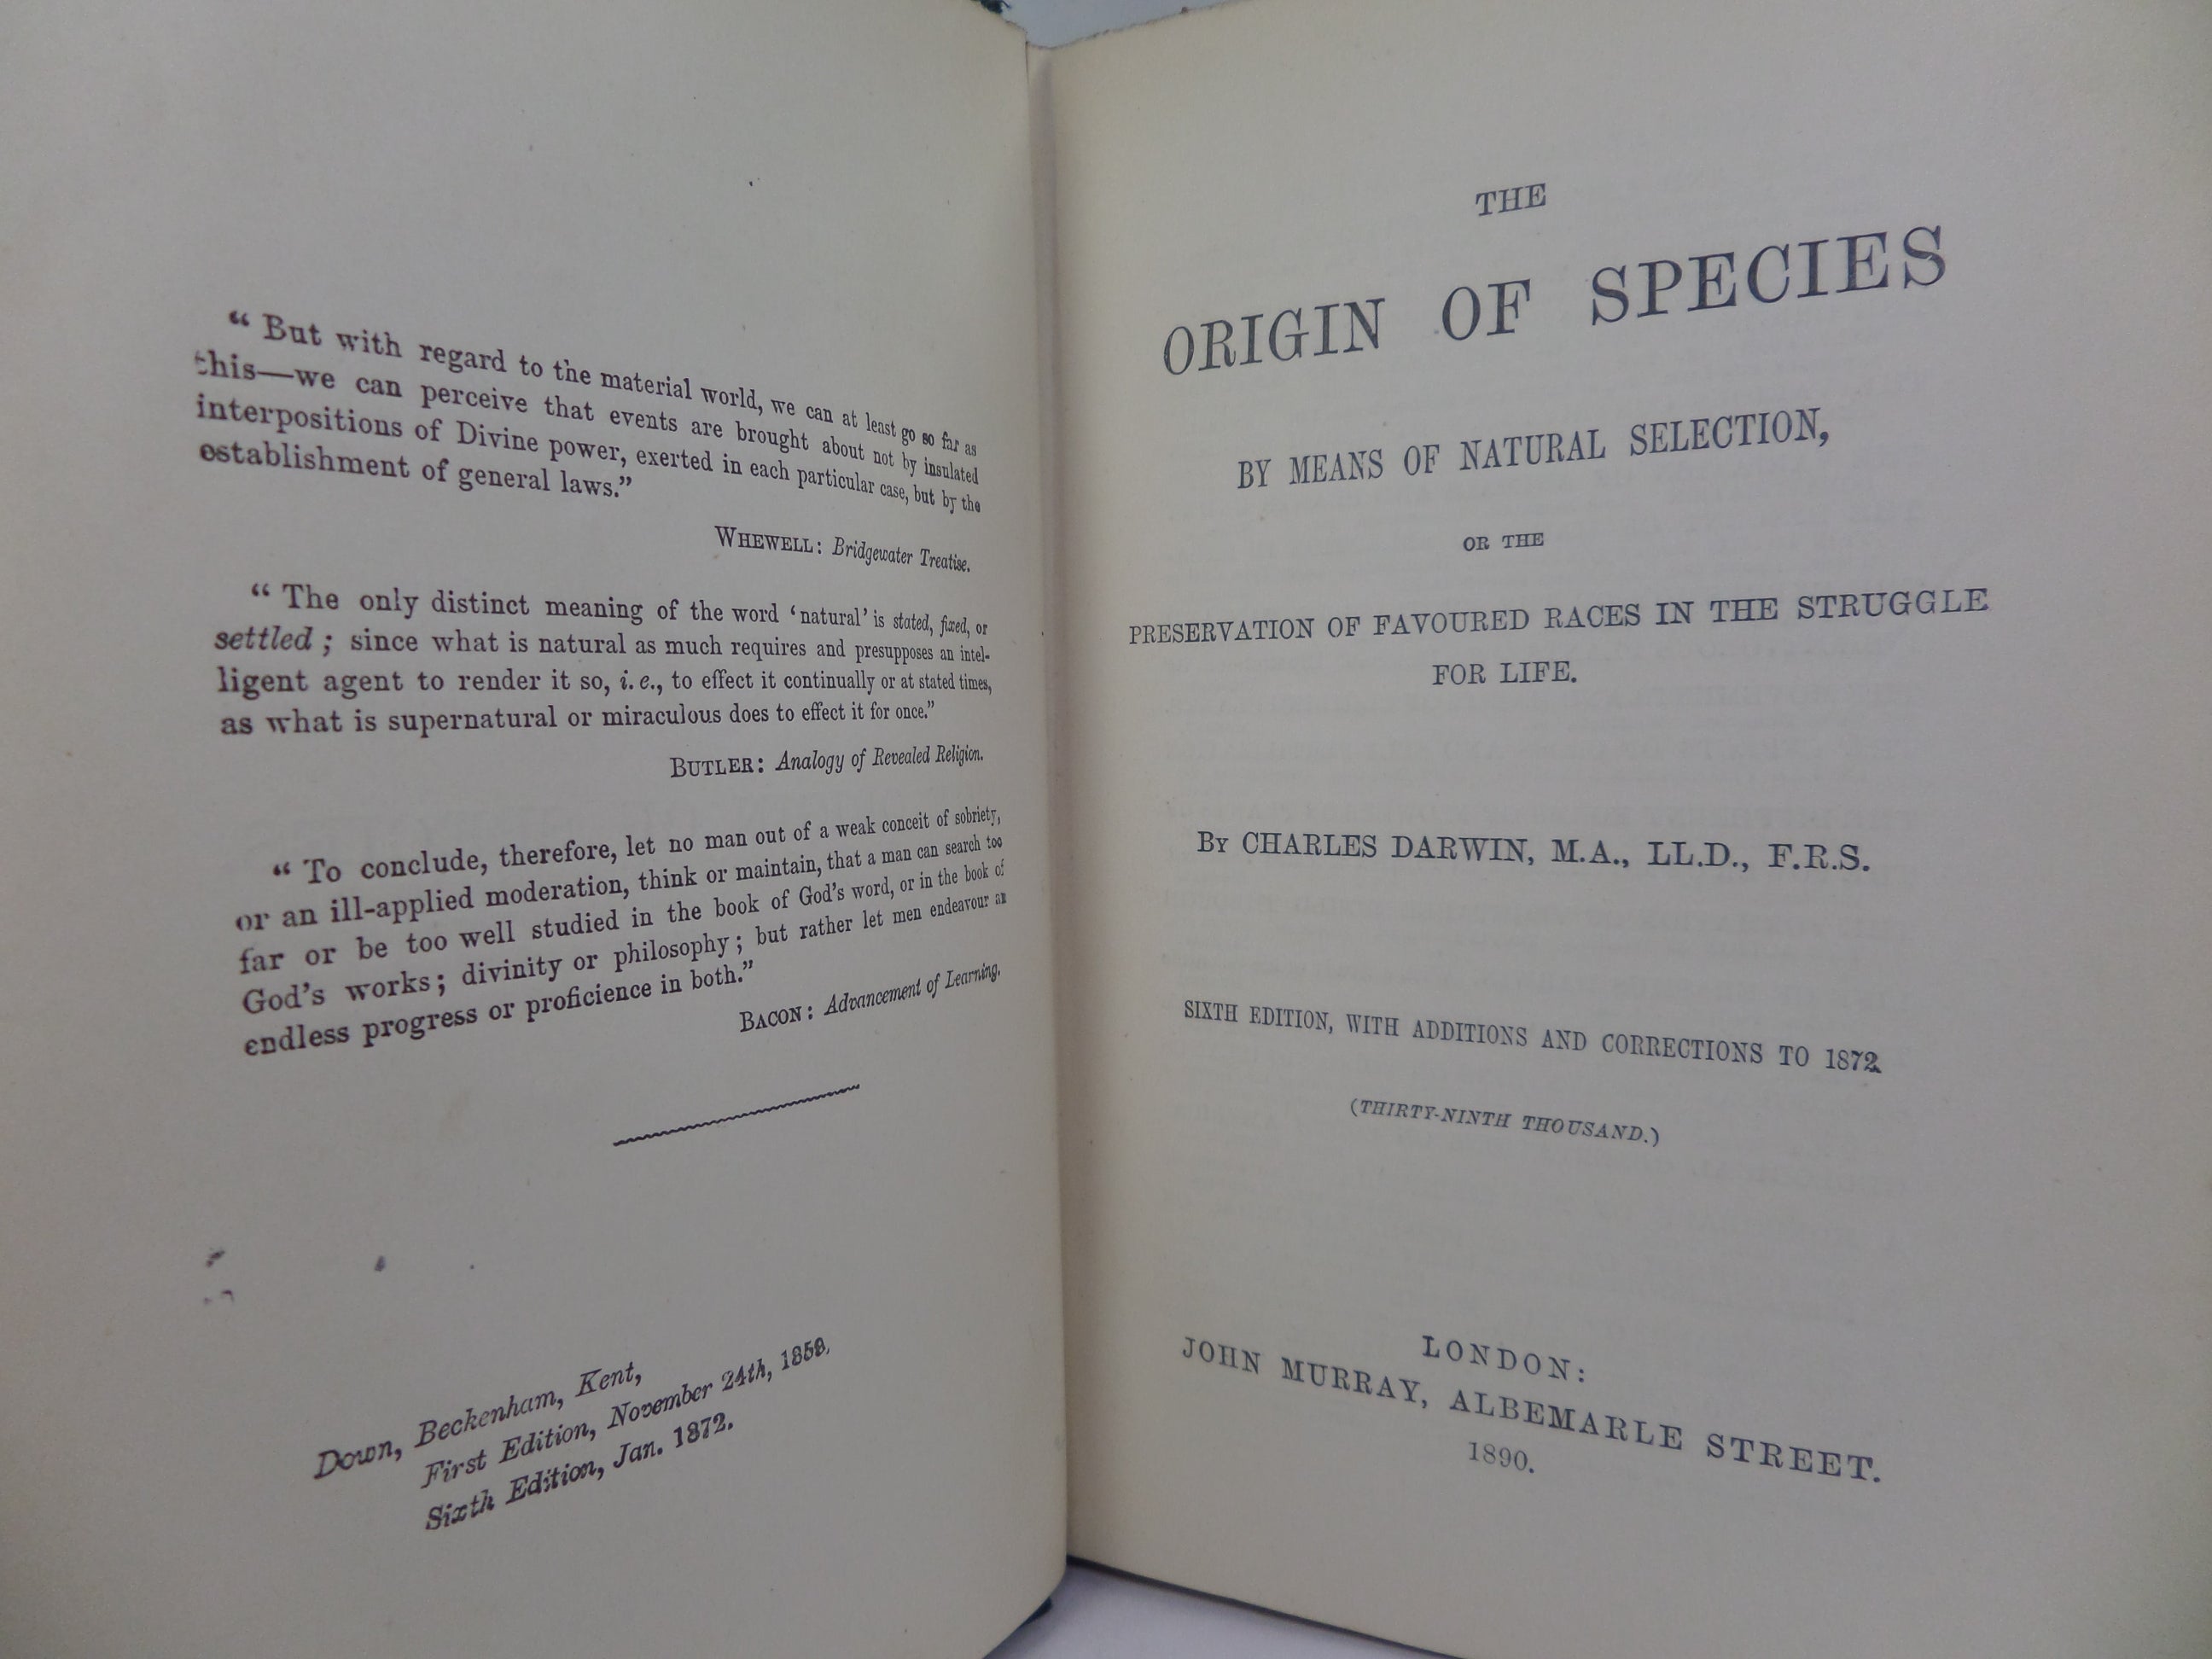 THE ORIGIN OF SPECIES BY MEANS OF NATURAL SELECTION BY CHARLES DARWIN 1890